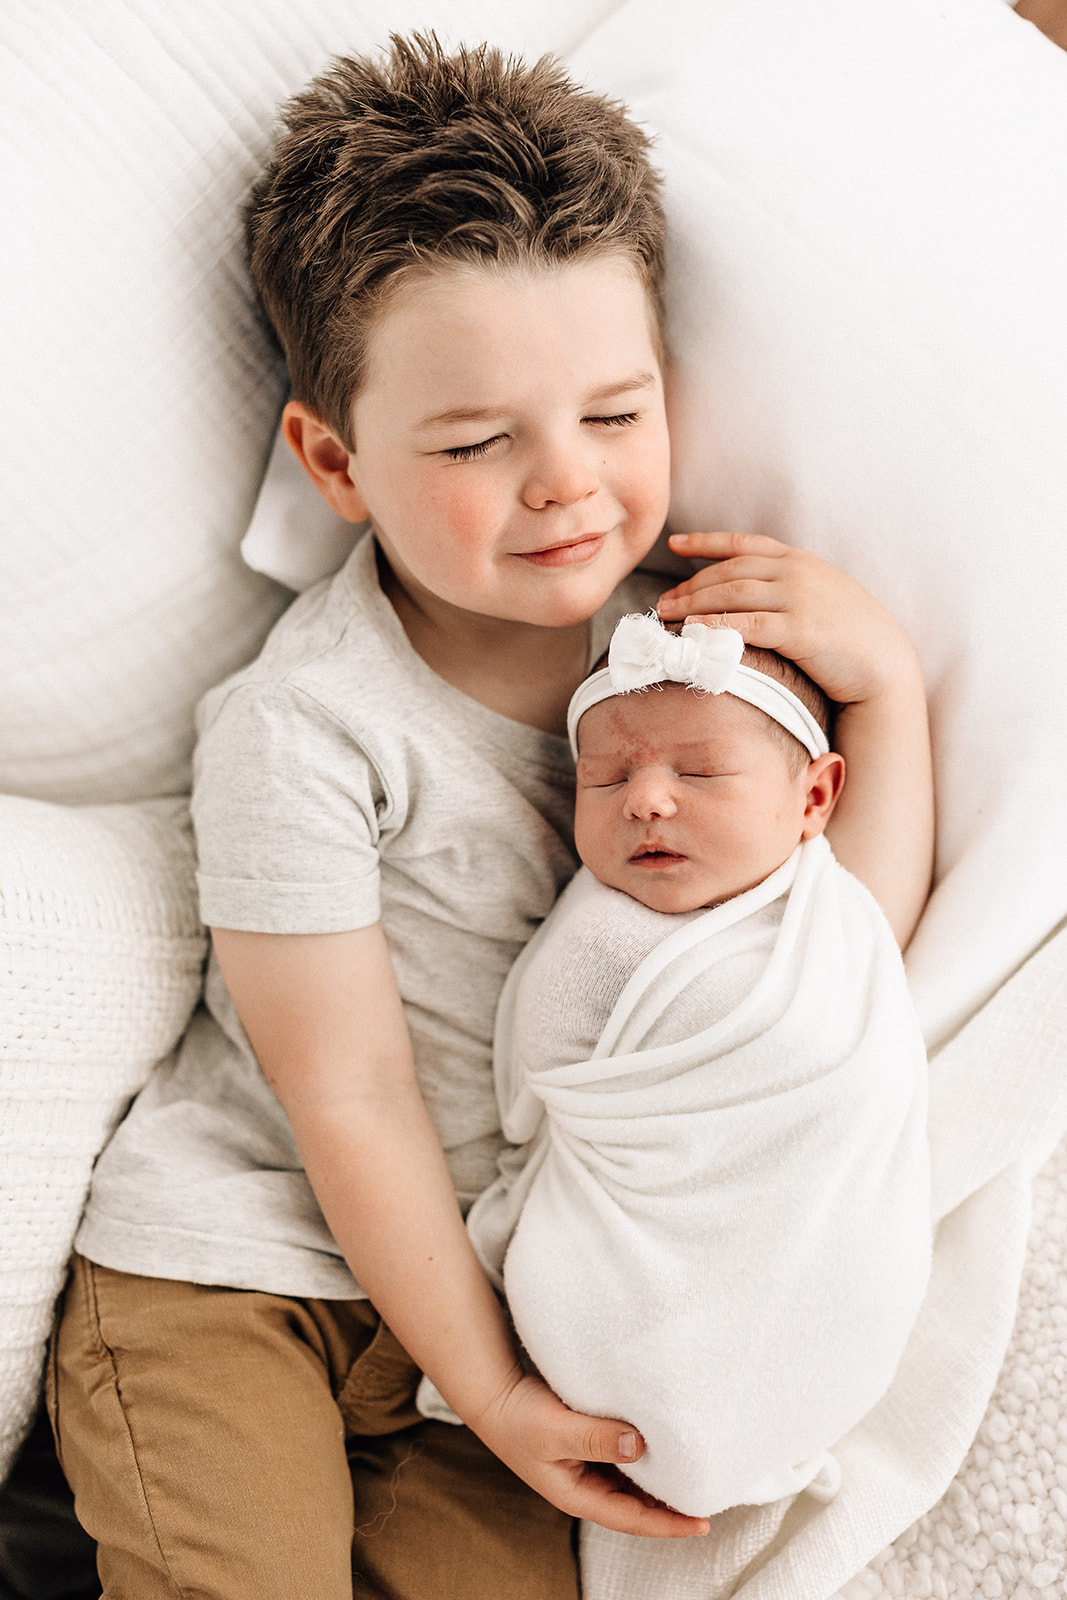 A toddler boy in a grey shirt and brown pants sleeps on a couch while holding his sleeping newborn baby sister in a white swaddle before some Toddler Activities St. Louis